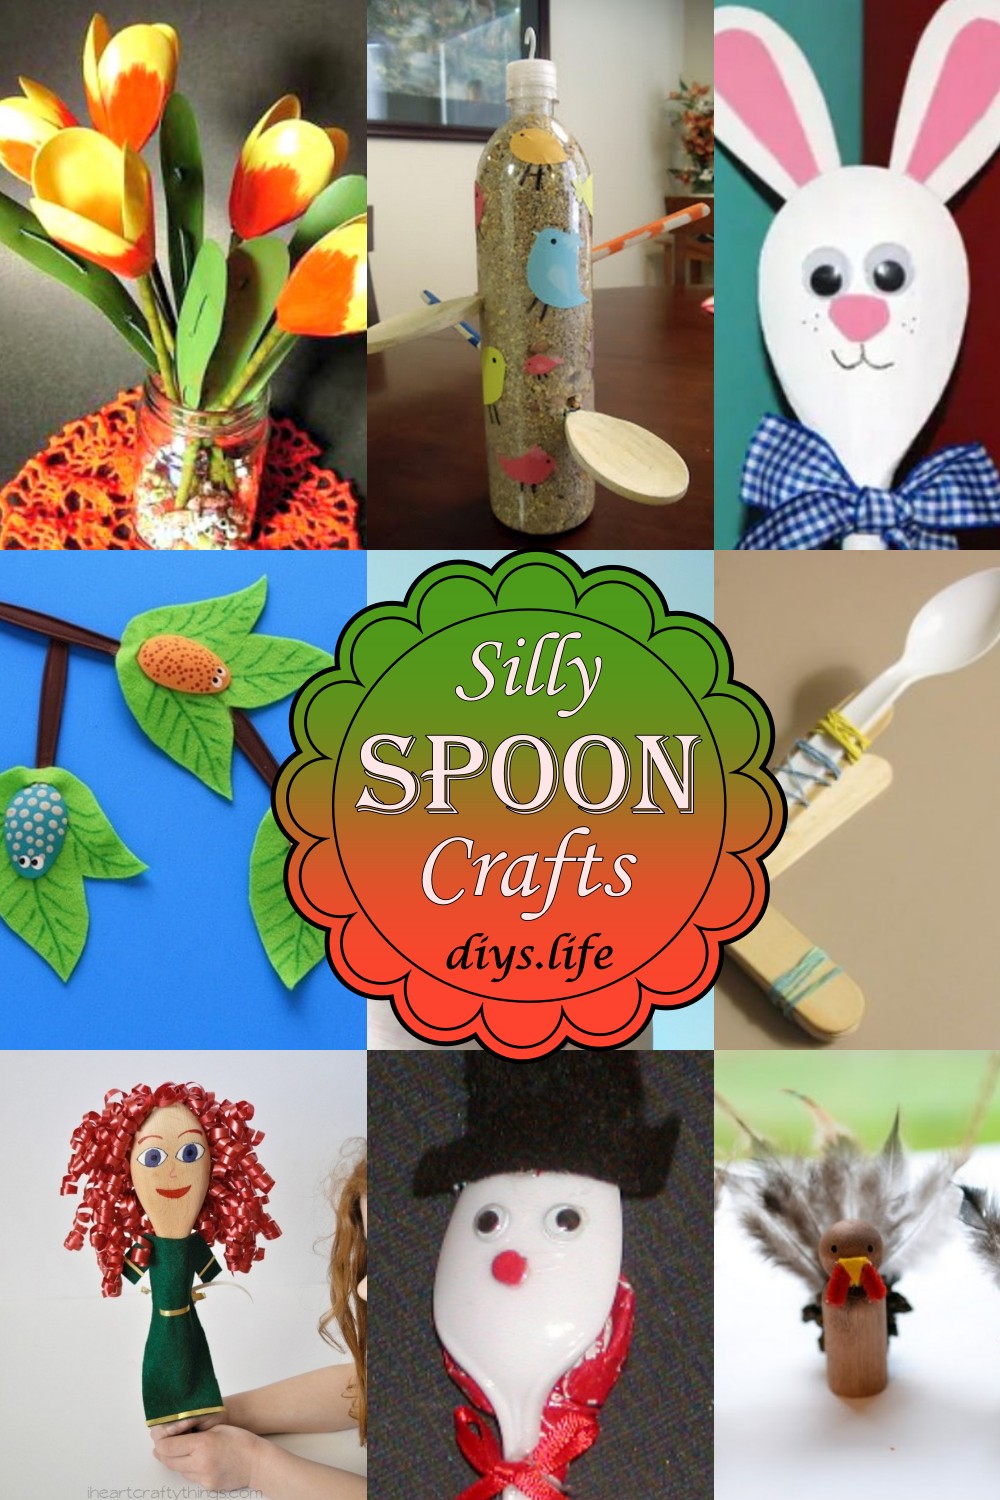 Silly Spoon Crafts